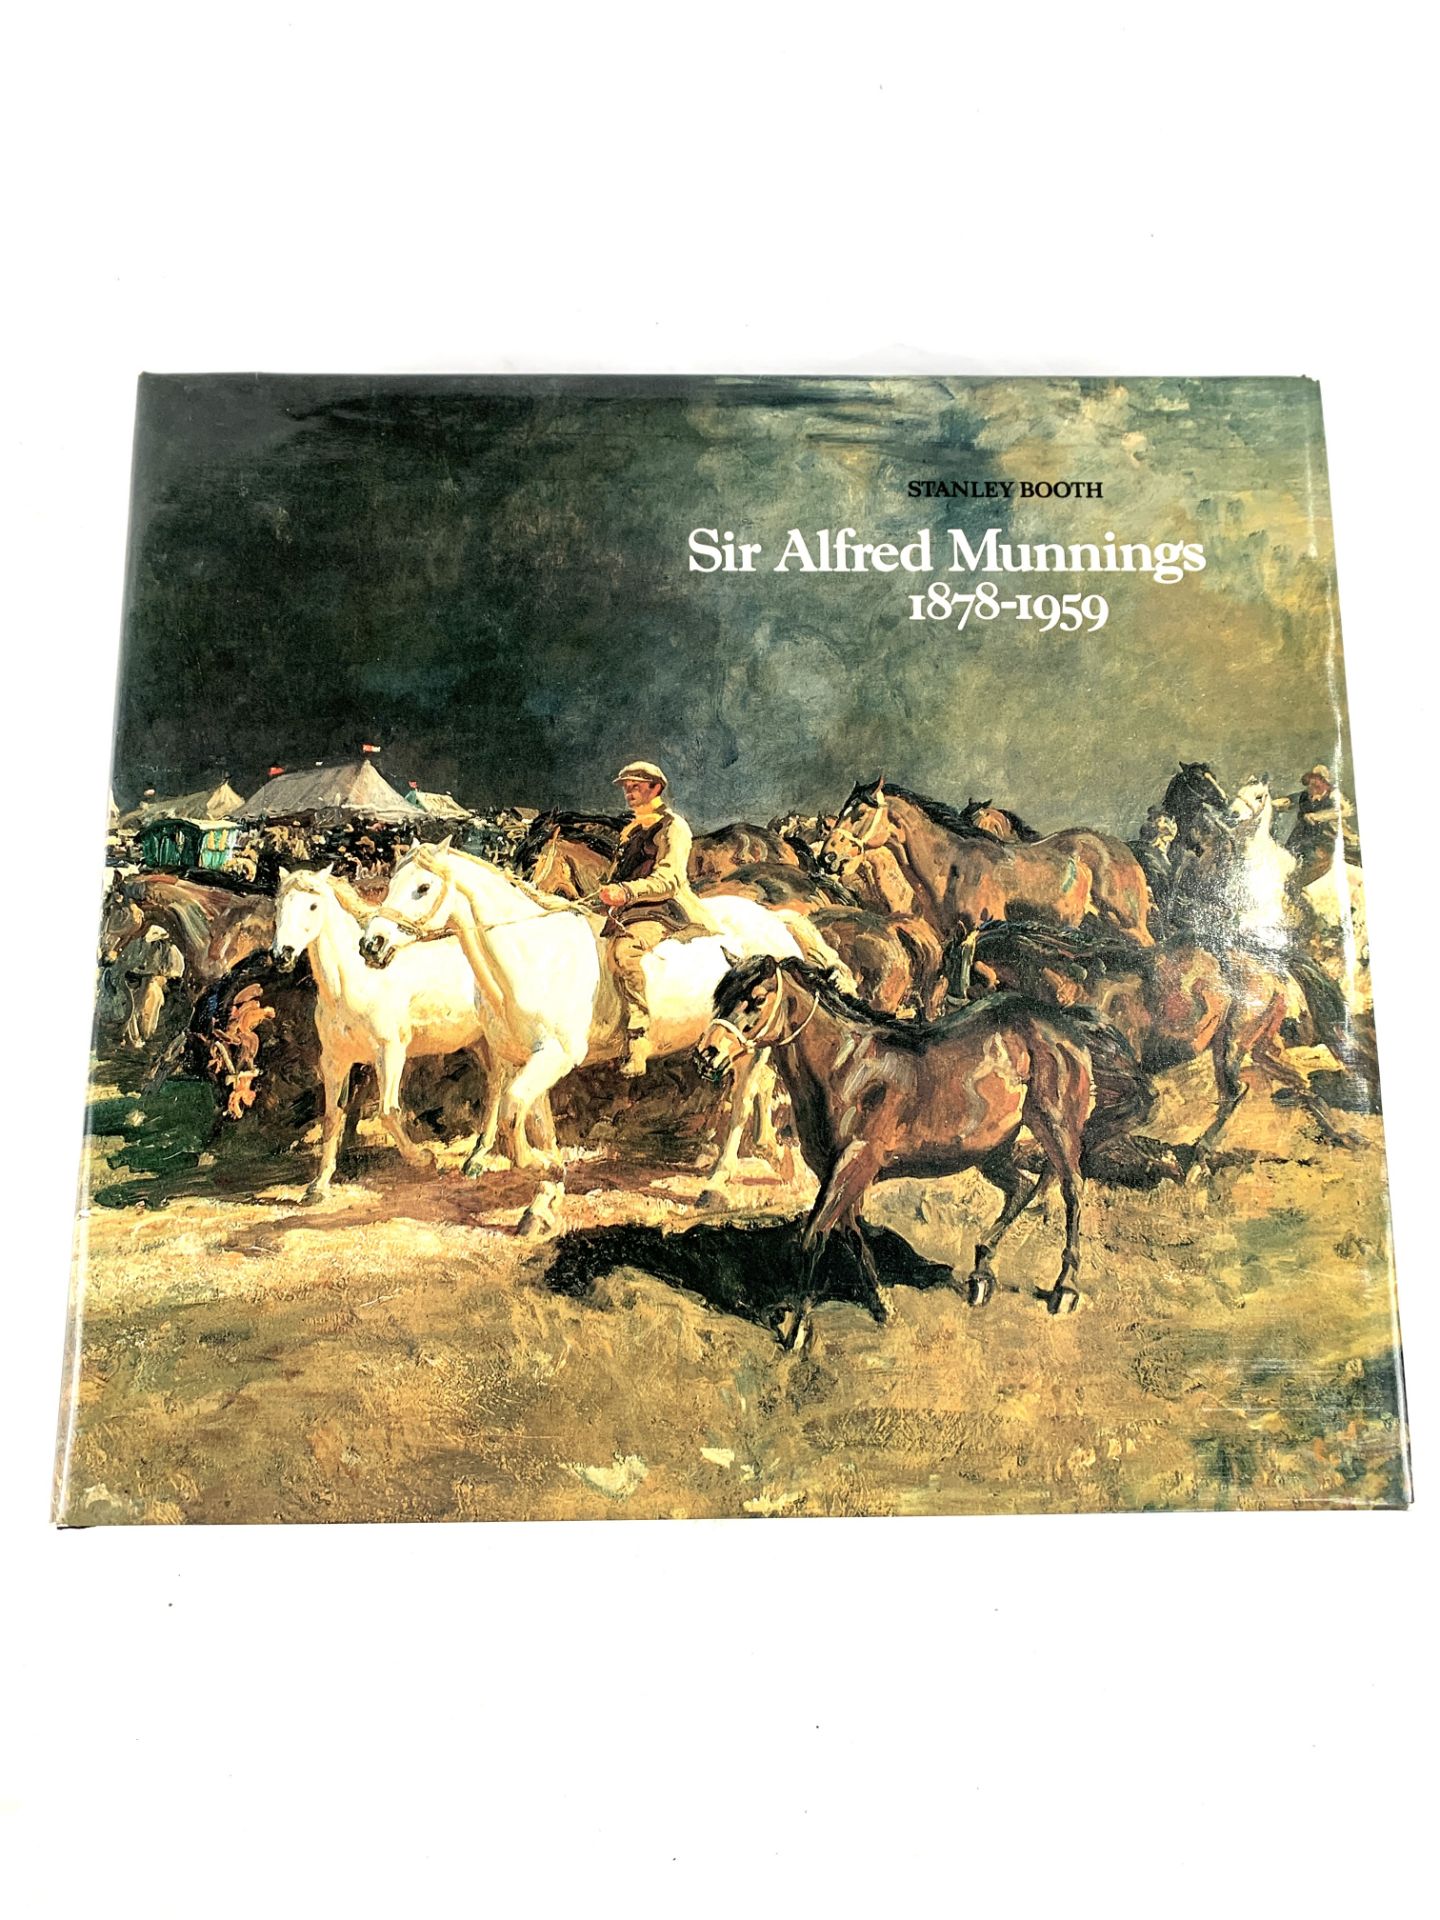 "Sir Alfred Munnings 1878-1959", A Centenary Tribute, by Stanley Booth.